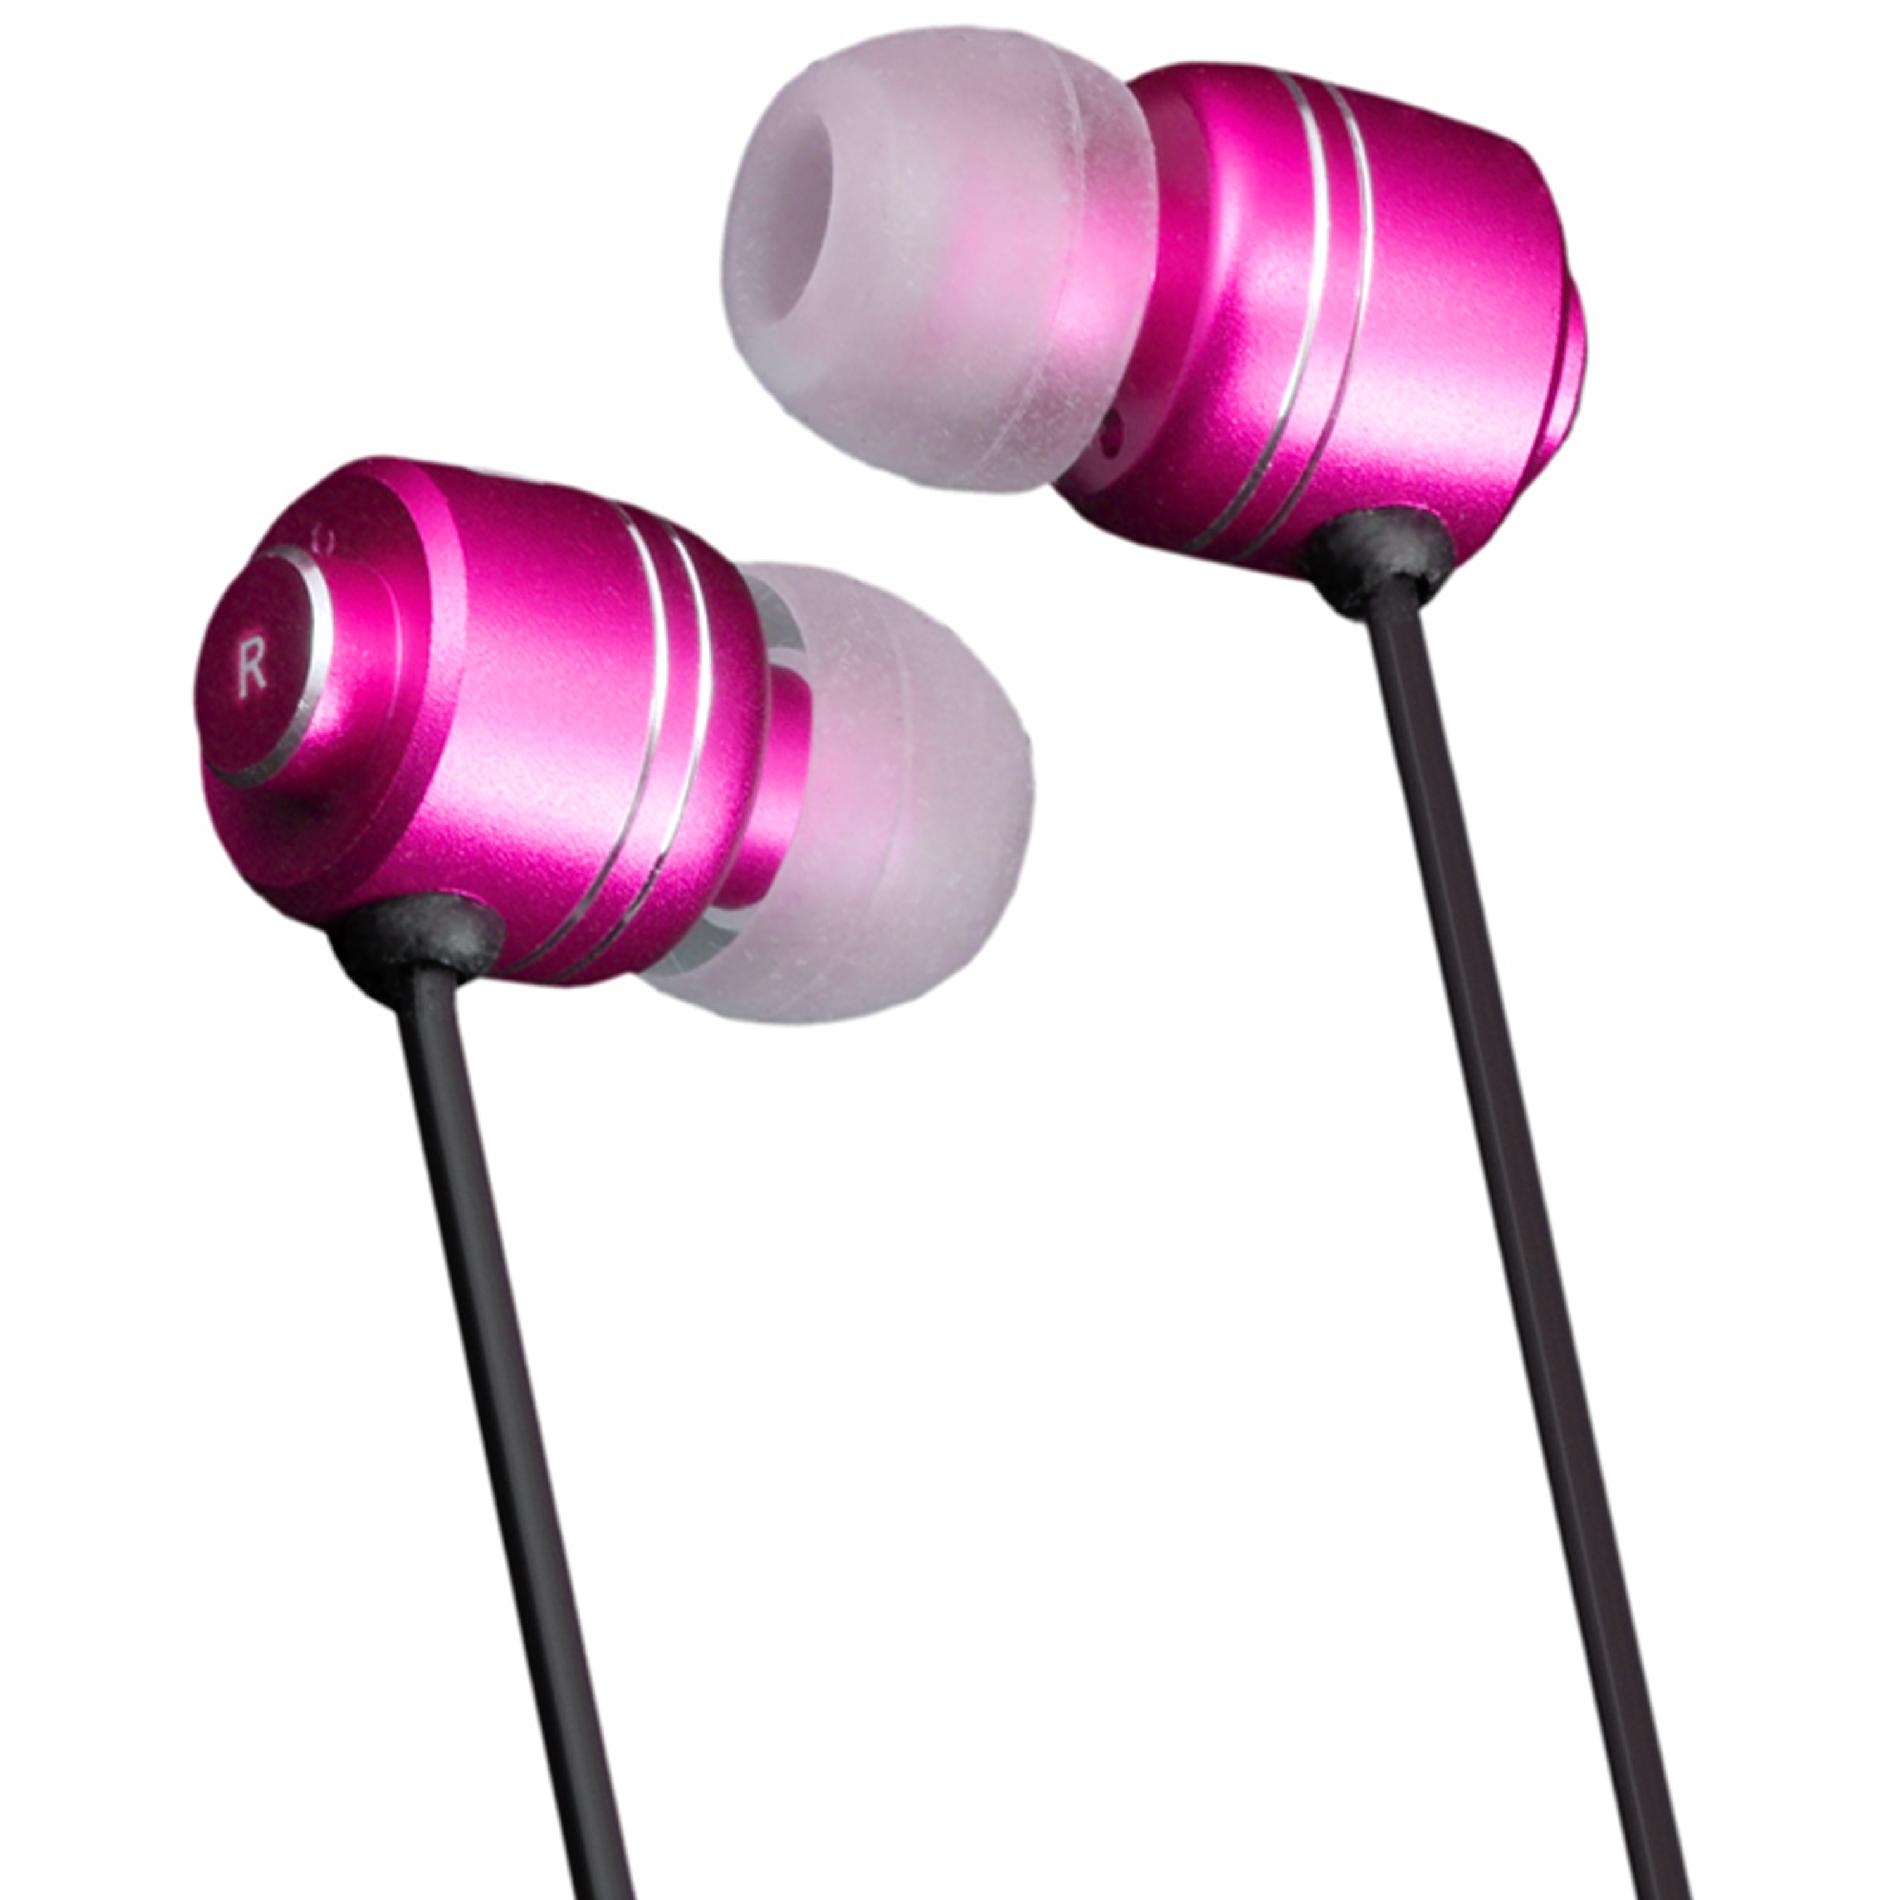 EAN 9328854001556 product image for PRO Noise Isolation Alloy Earphones - Pink | upcitemdb.com